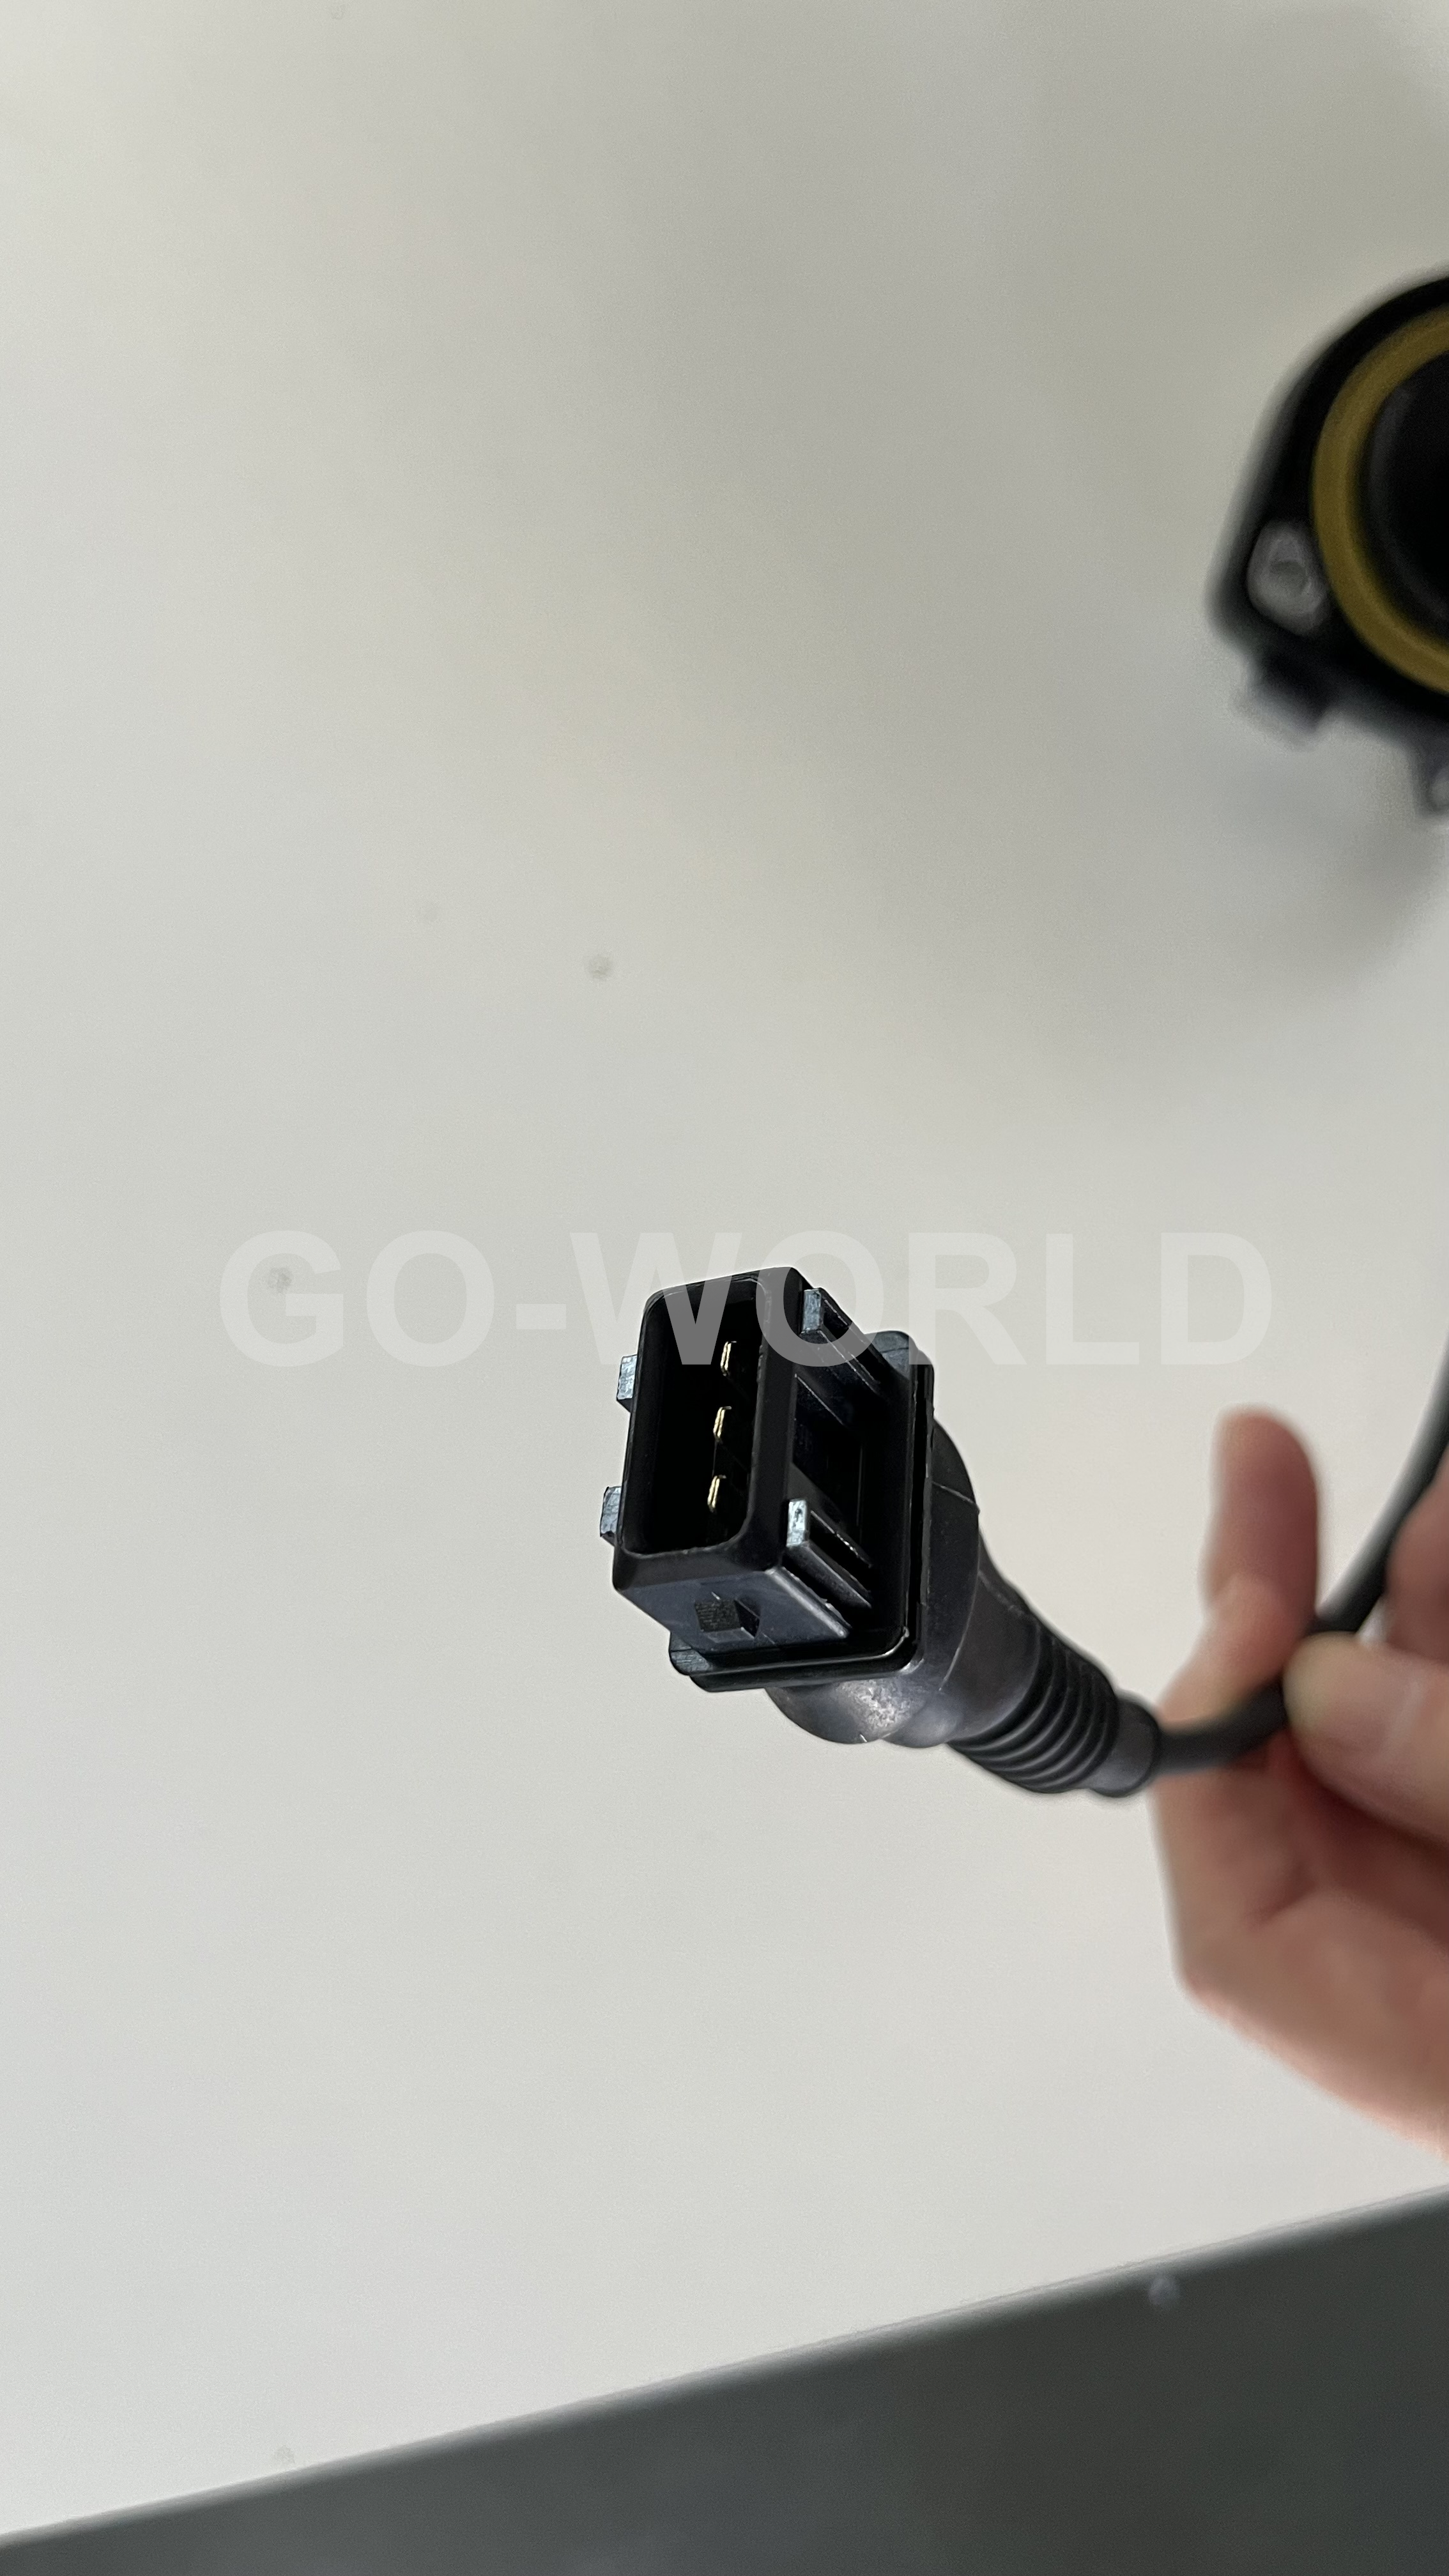 Auto Spare Parts OEM Engine Oil Level Sensor with OEM Number 12611406609 for BMW Made in China